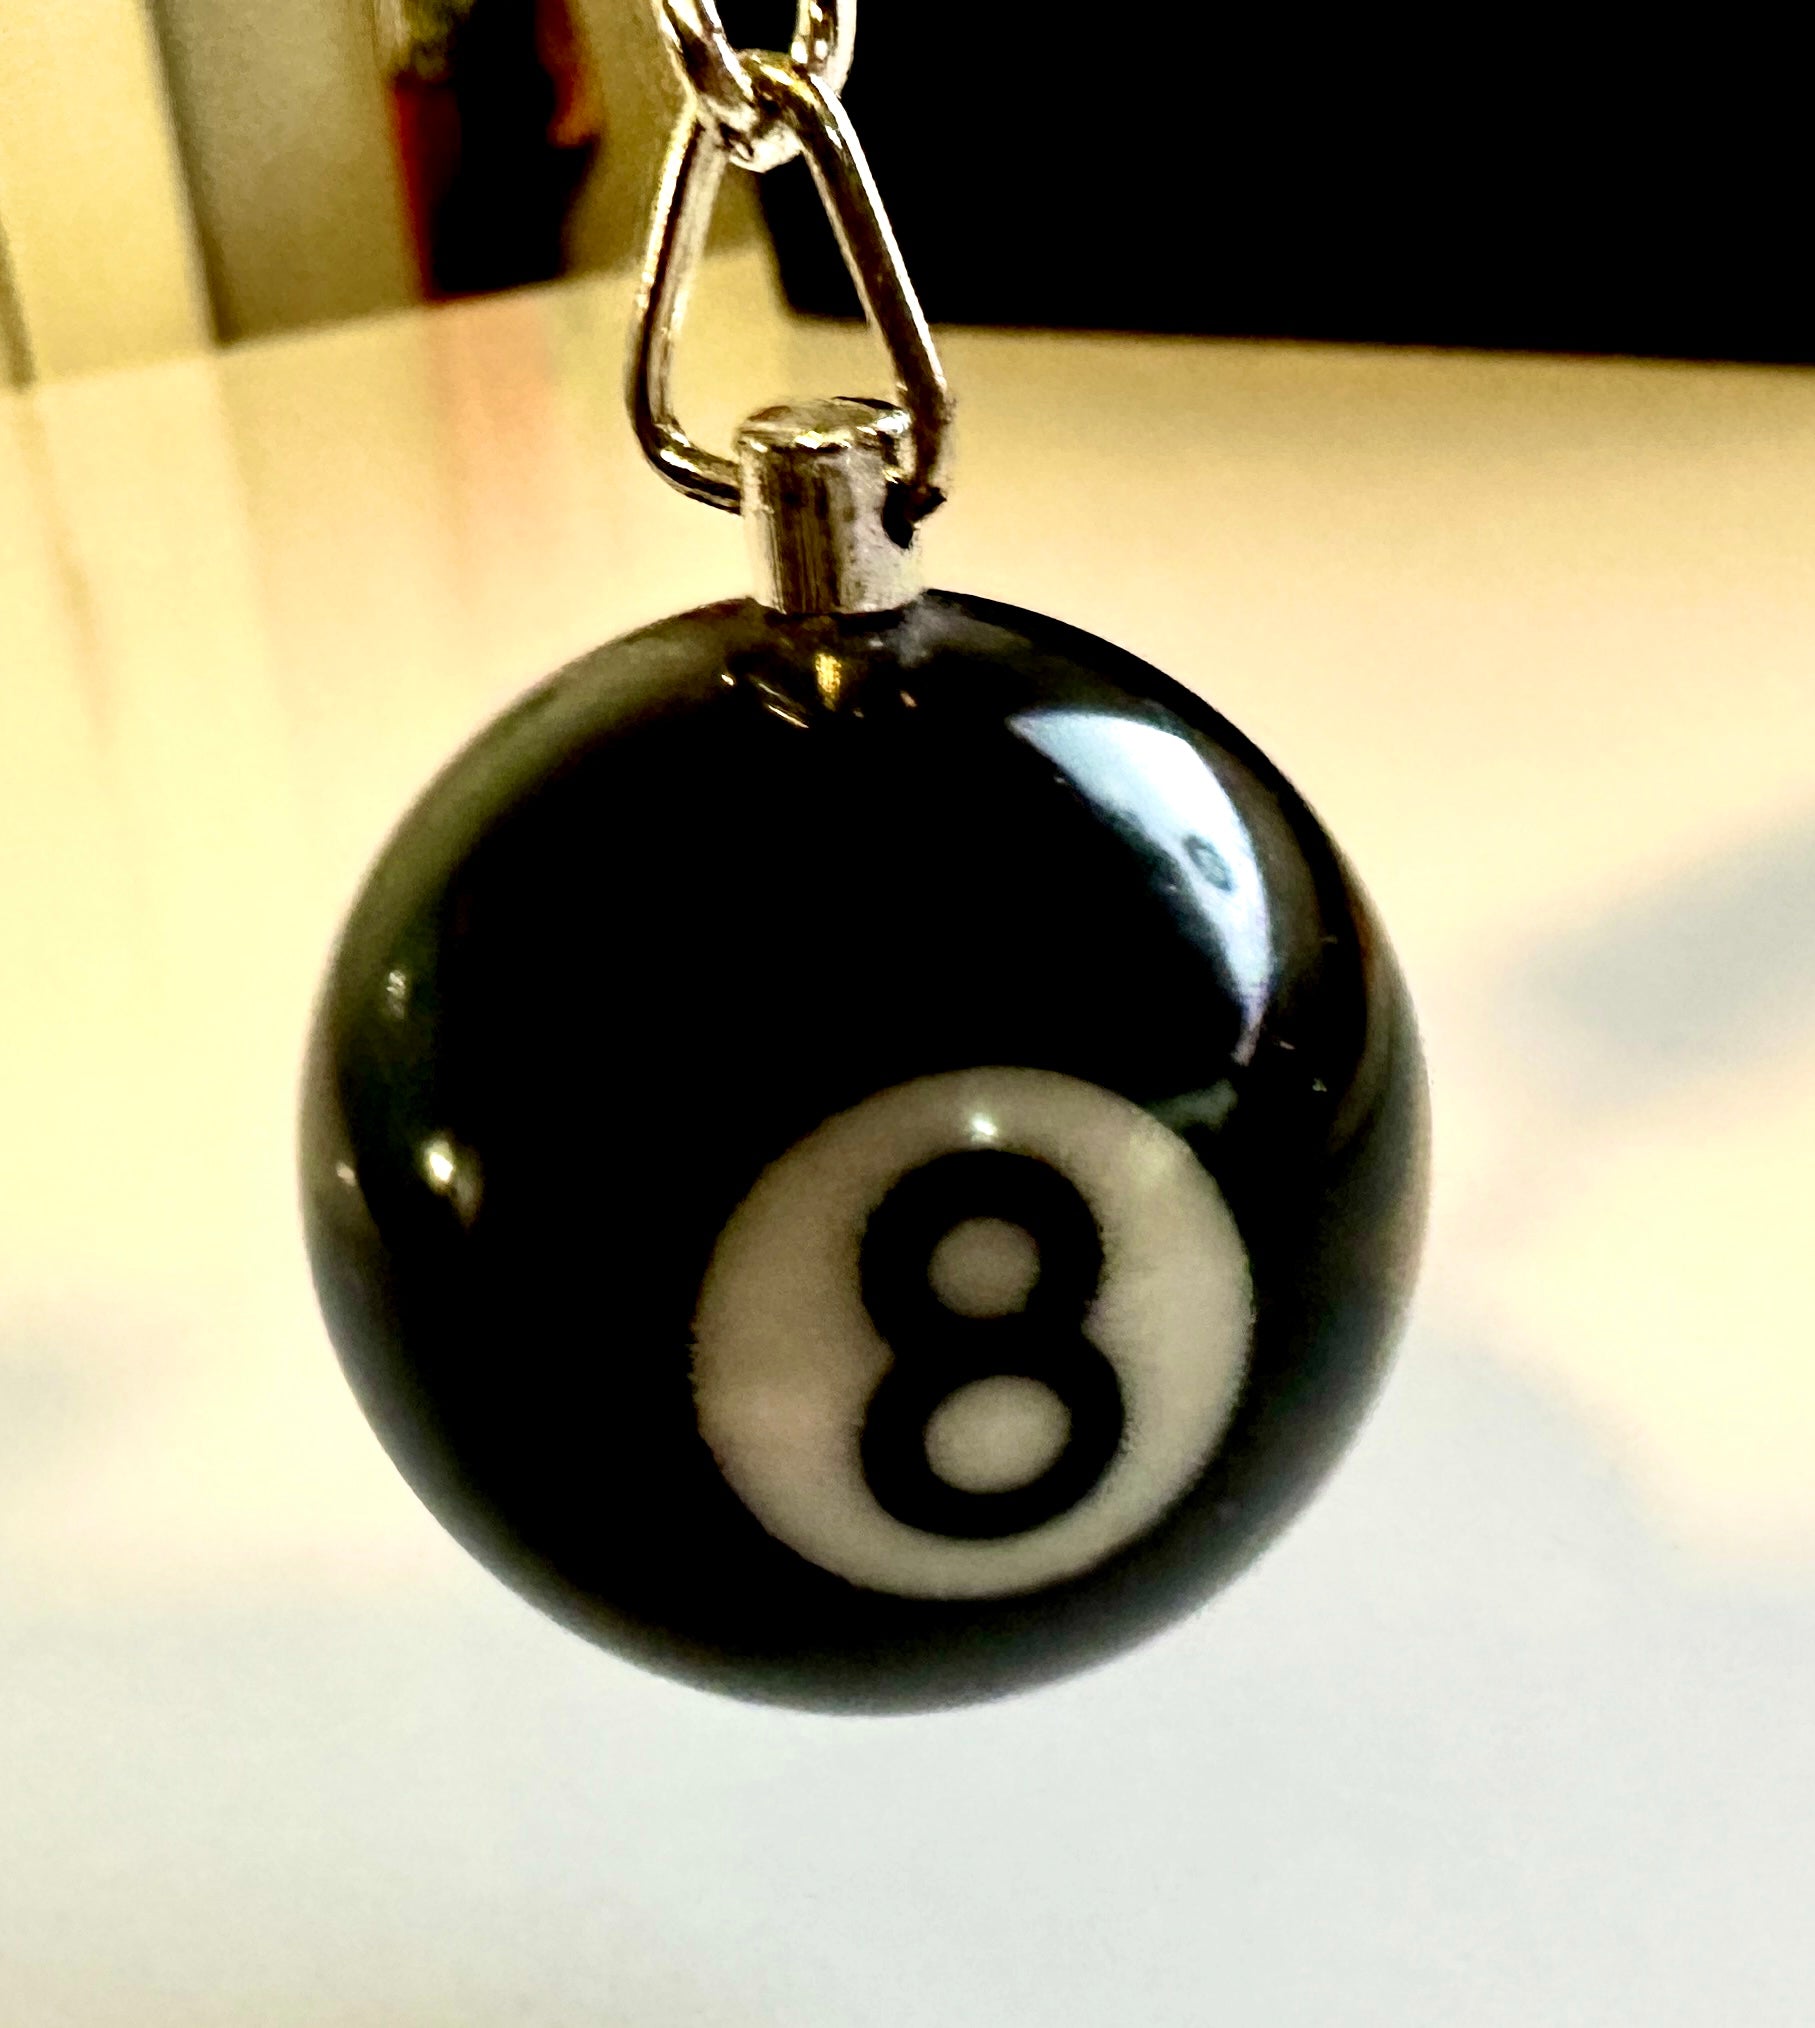 8 Ball Keychain - Accessories & Home Goods